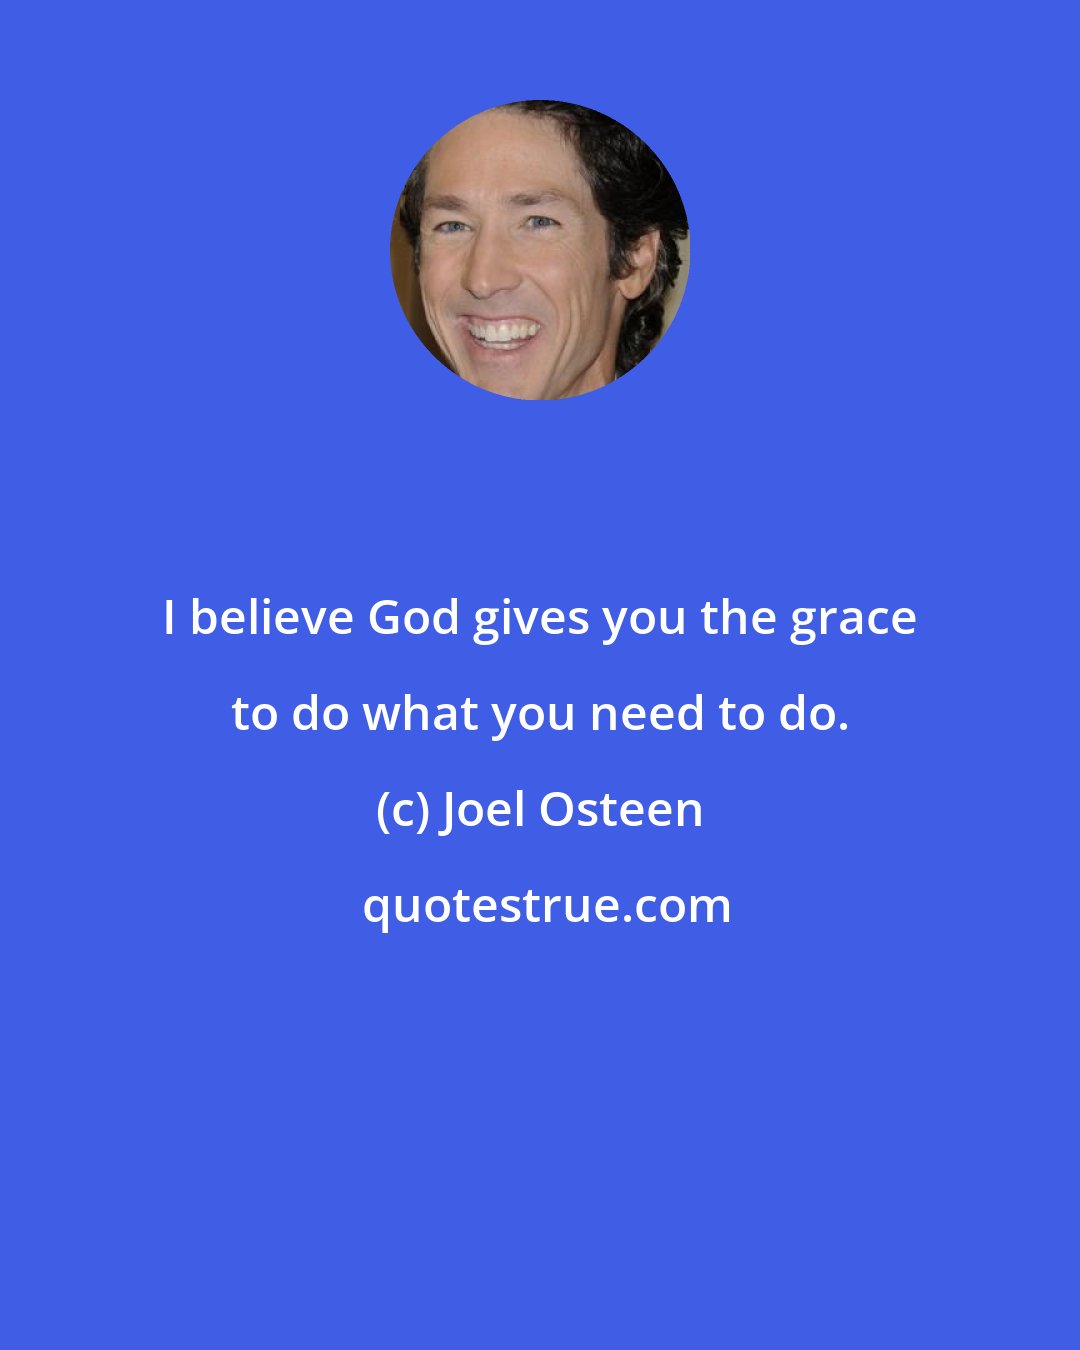 Joel Osteen: I believe God gives you the grace to do what you need to do.